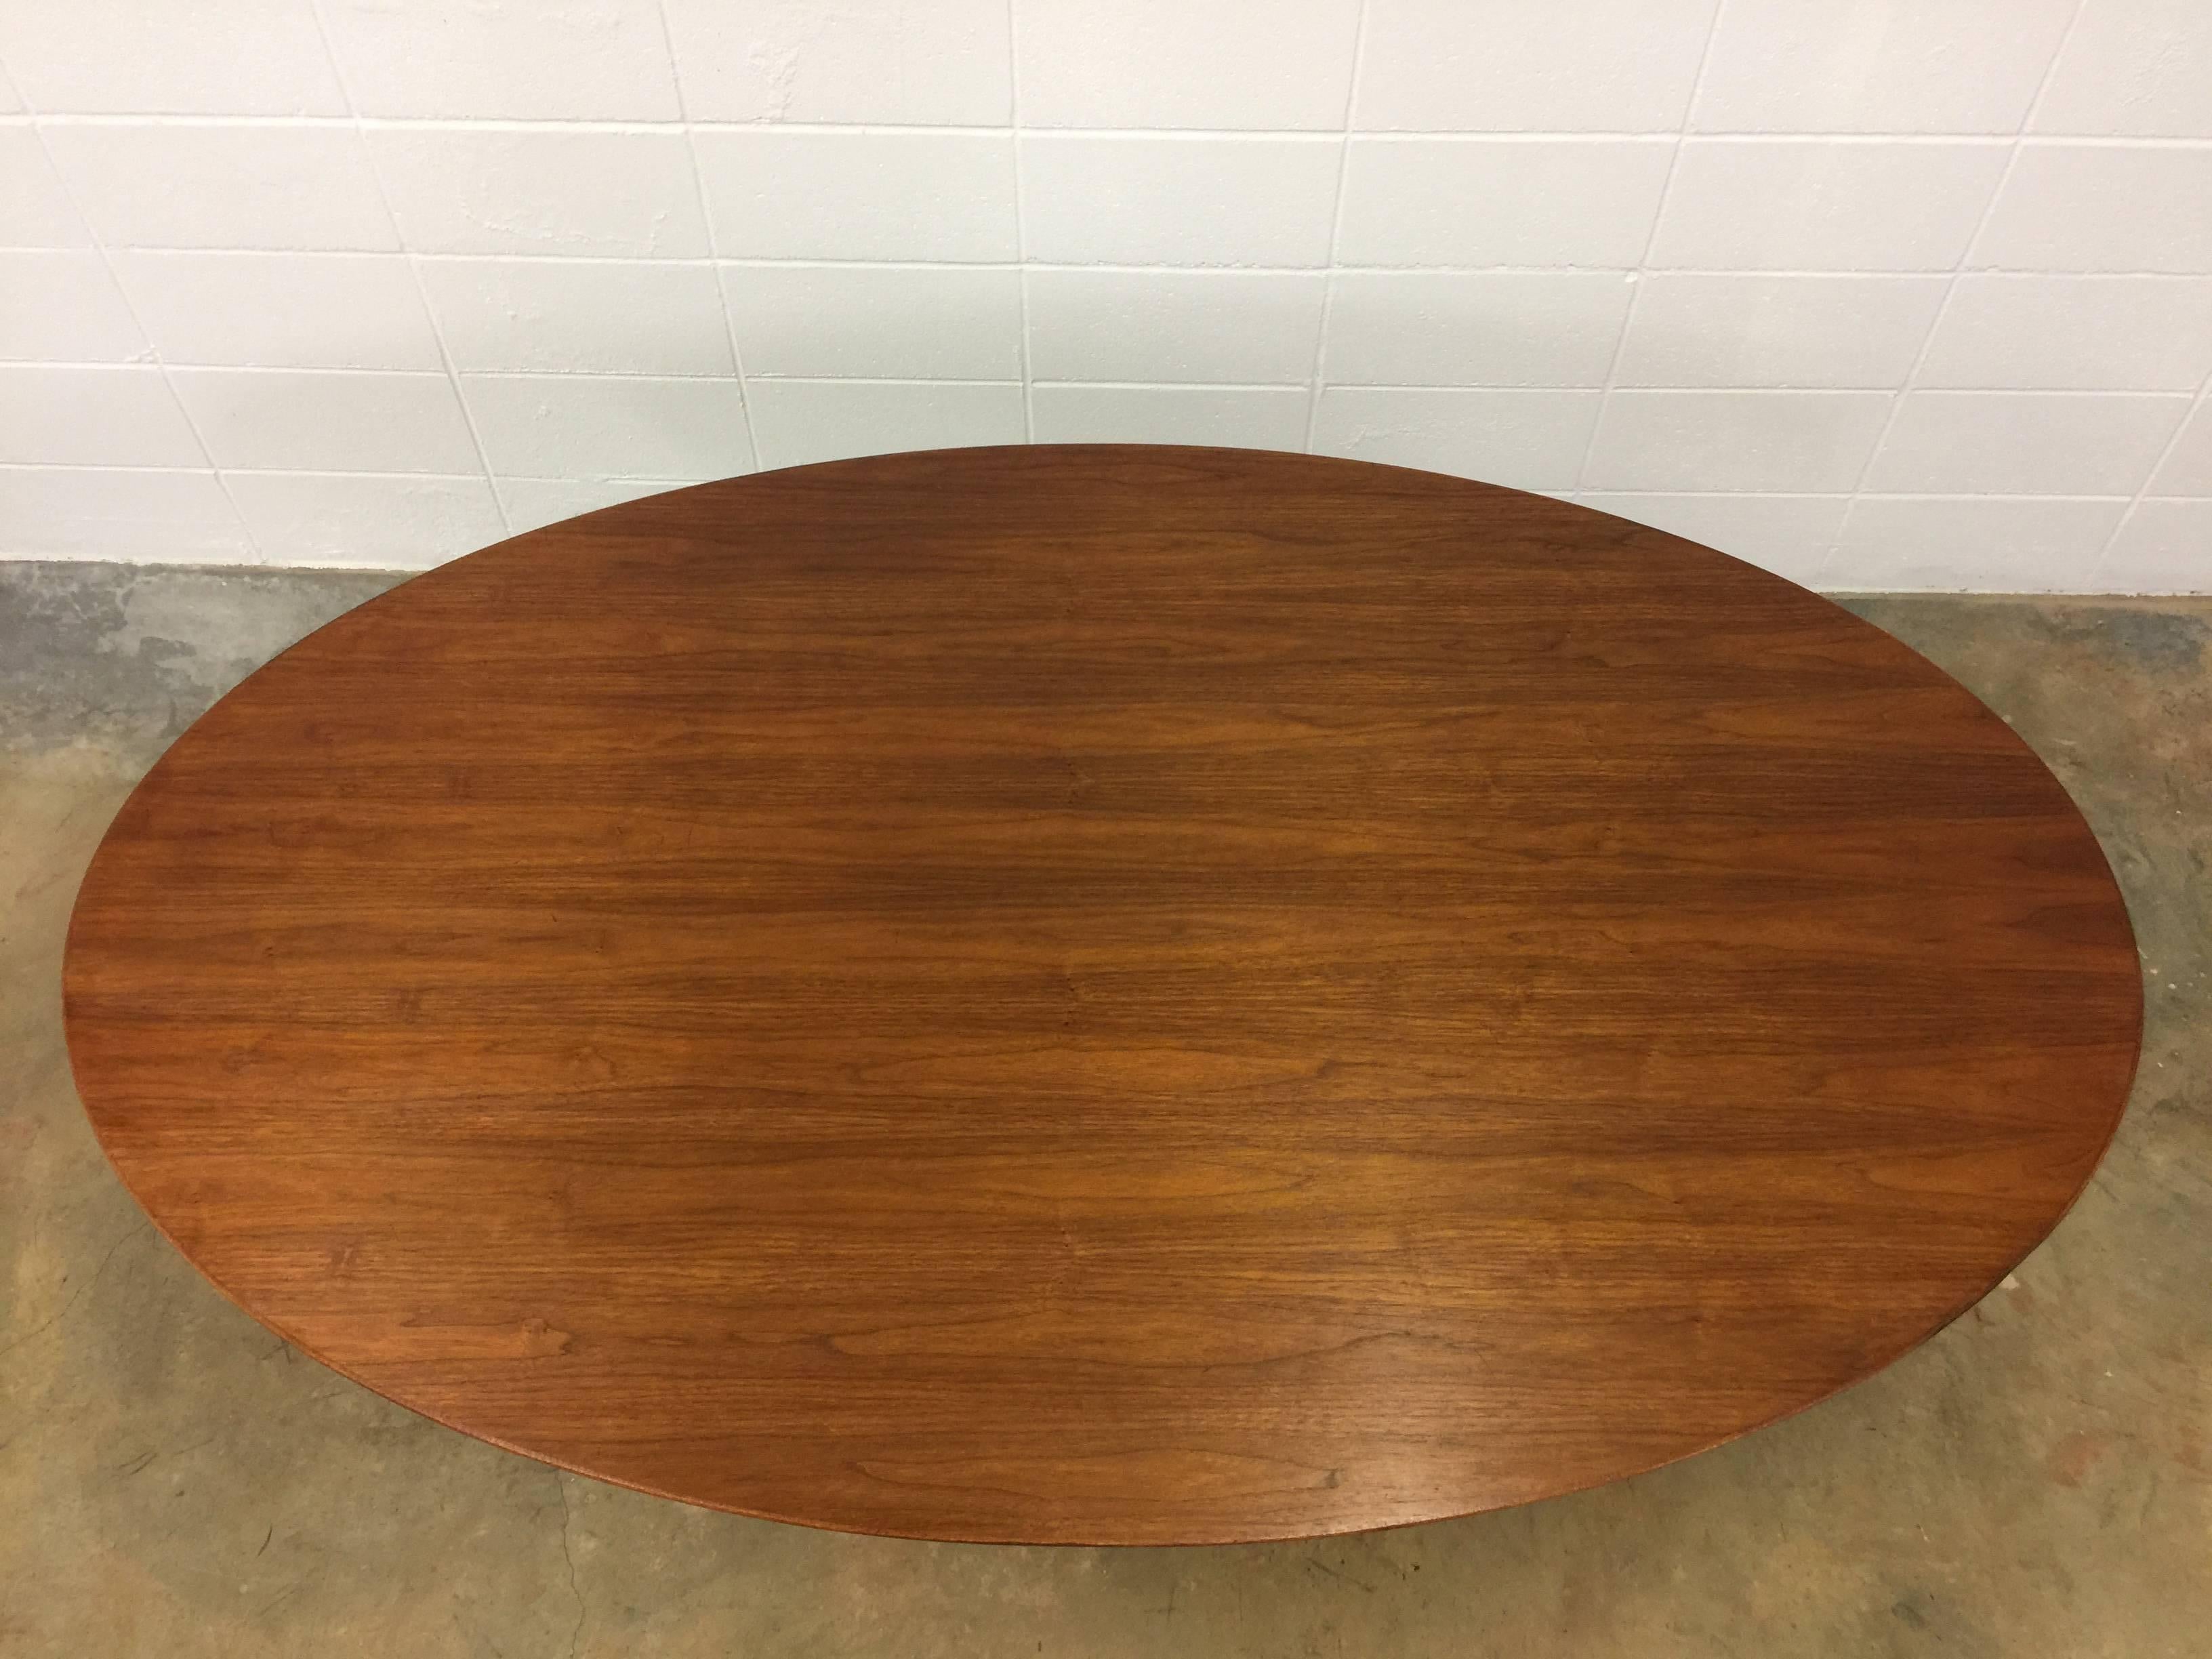 American Mid-Century Modern 2480 Table or Desk Designed by Florence Knoll for Knoll